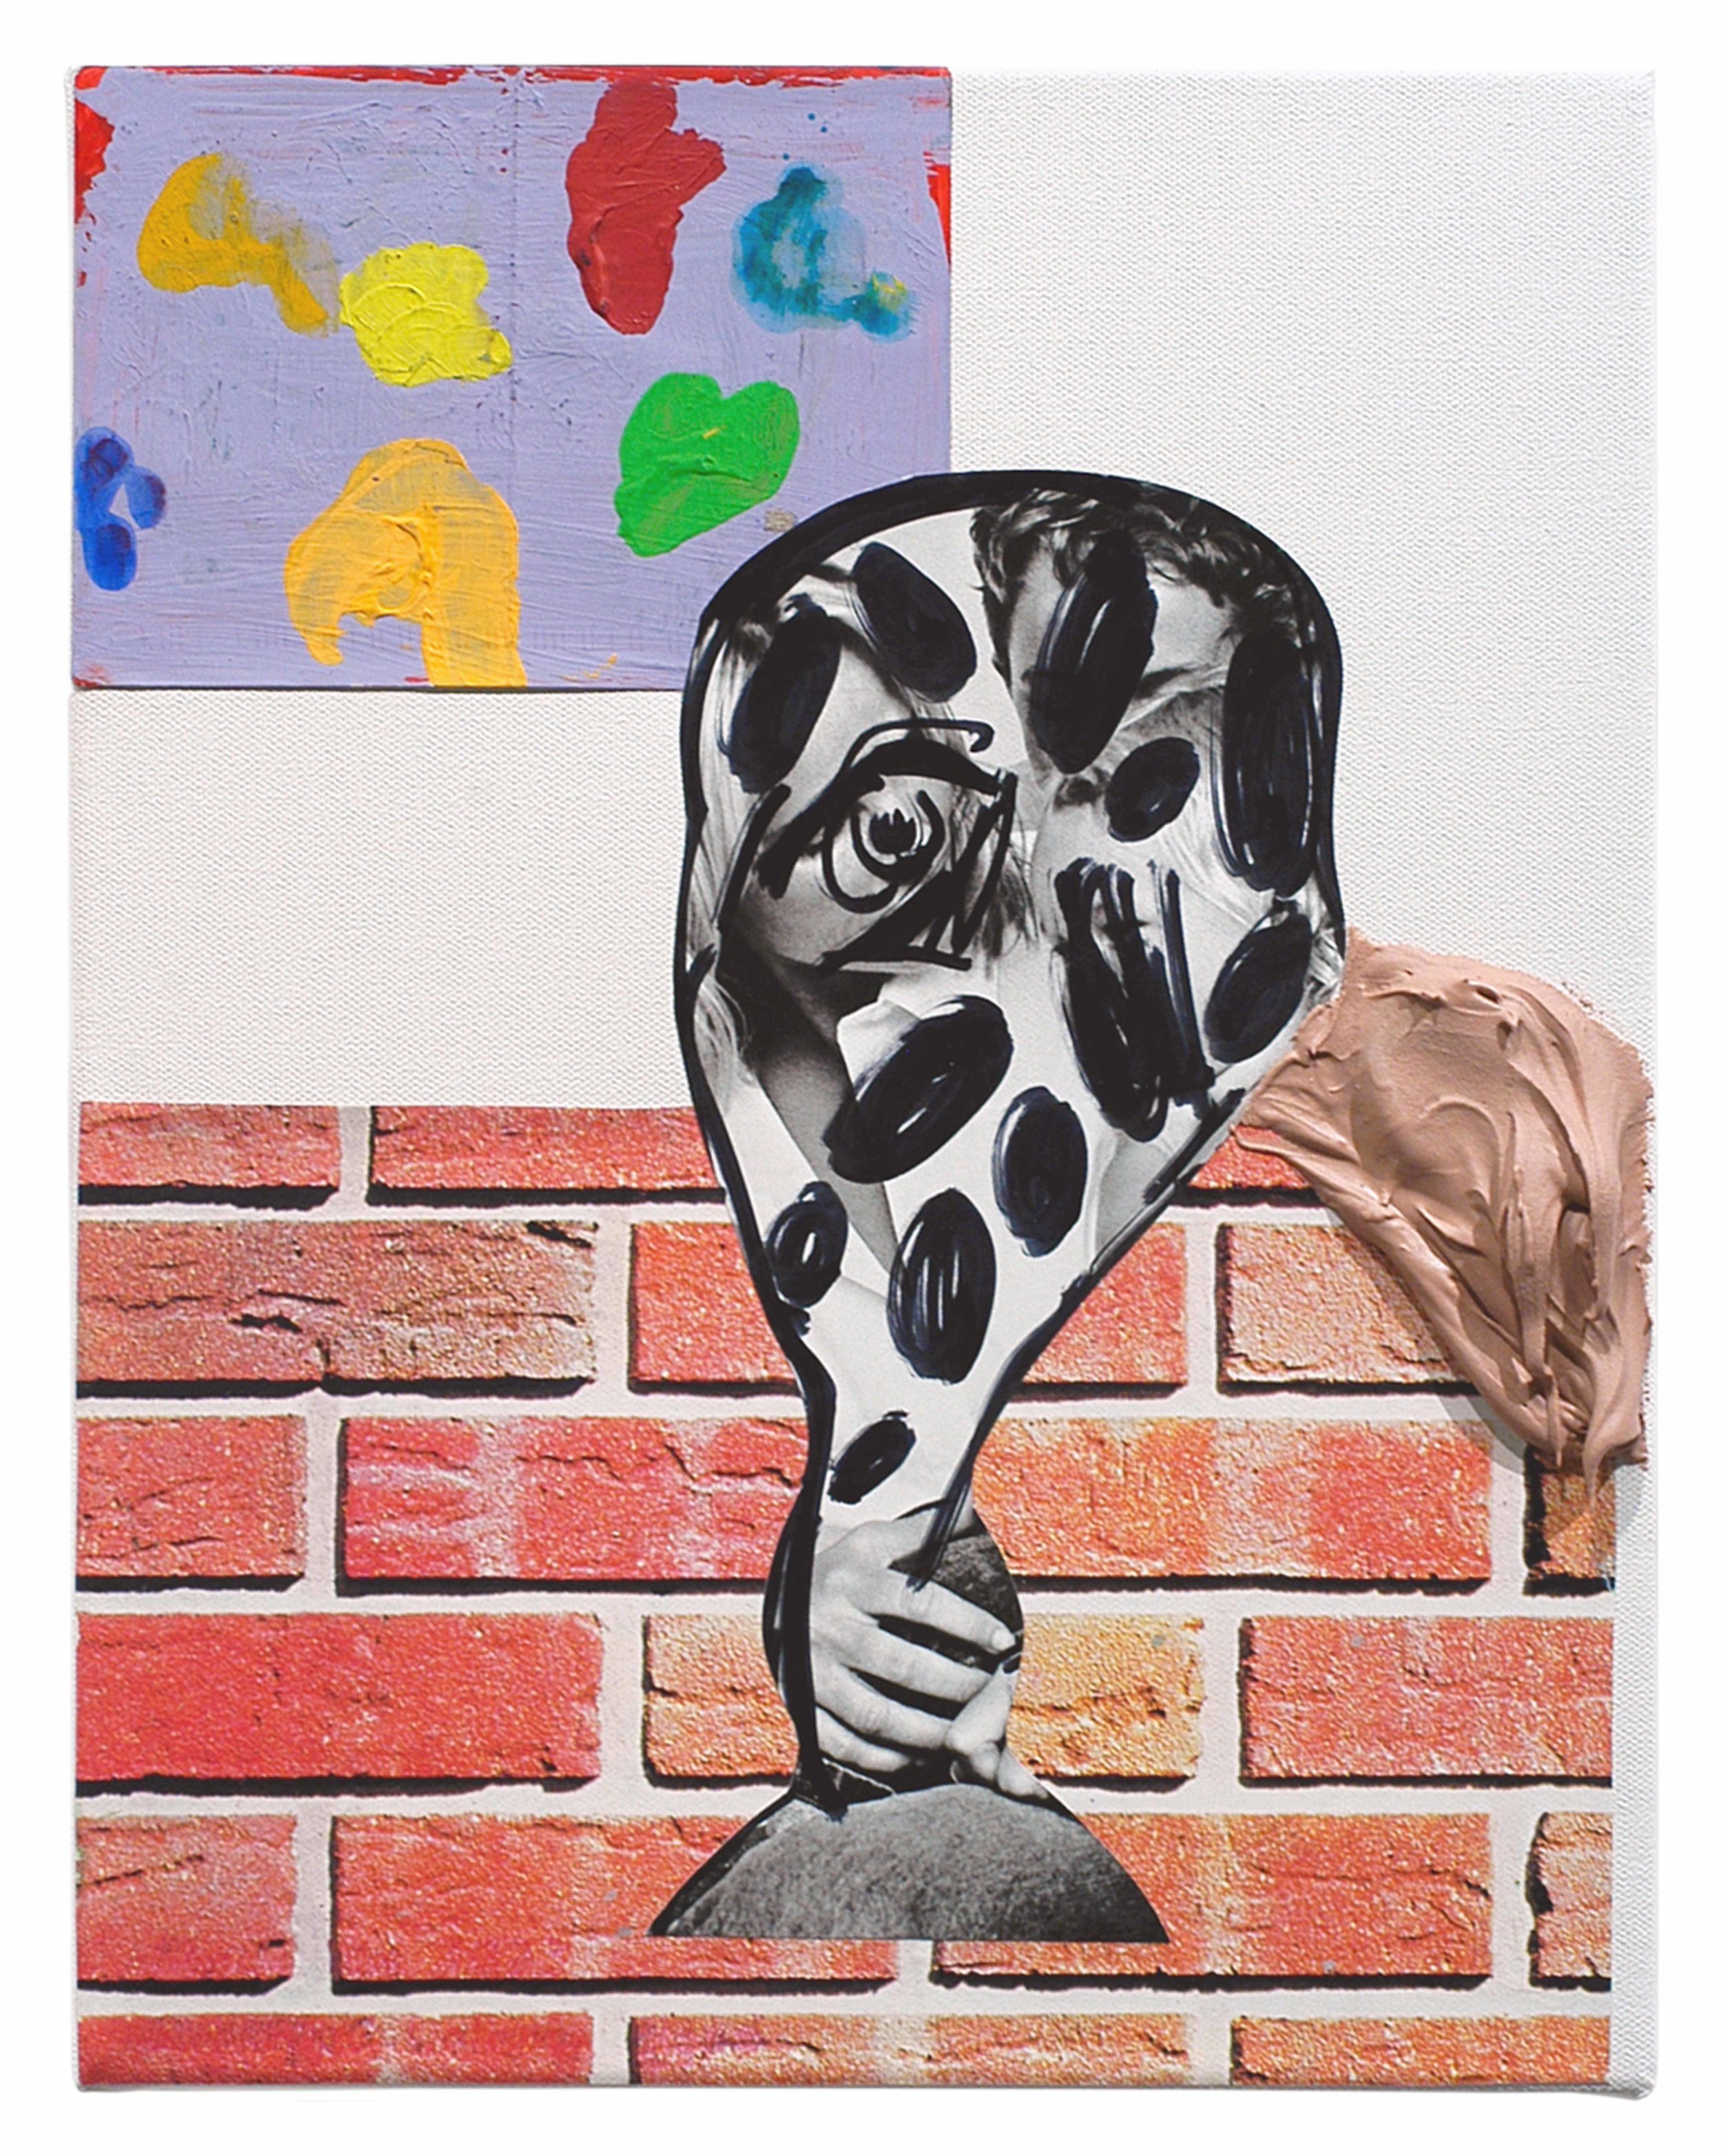  Drew Beattie  Problem About a Child &nbsp; 2005 acrylic, bondo, collage, permanent marker and paper on canvas&nbsp; 11 x 14 inches 